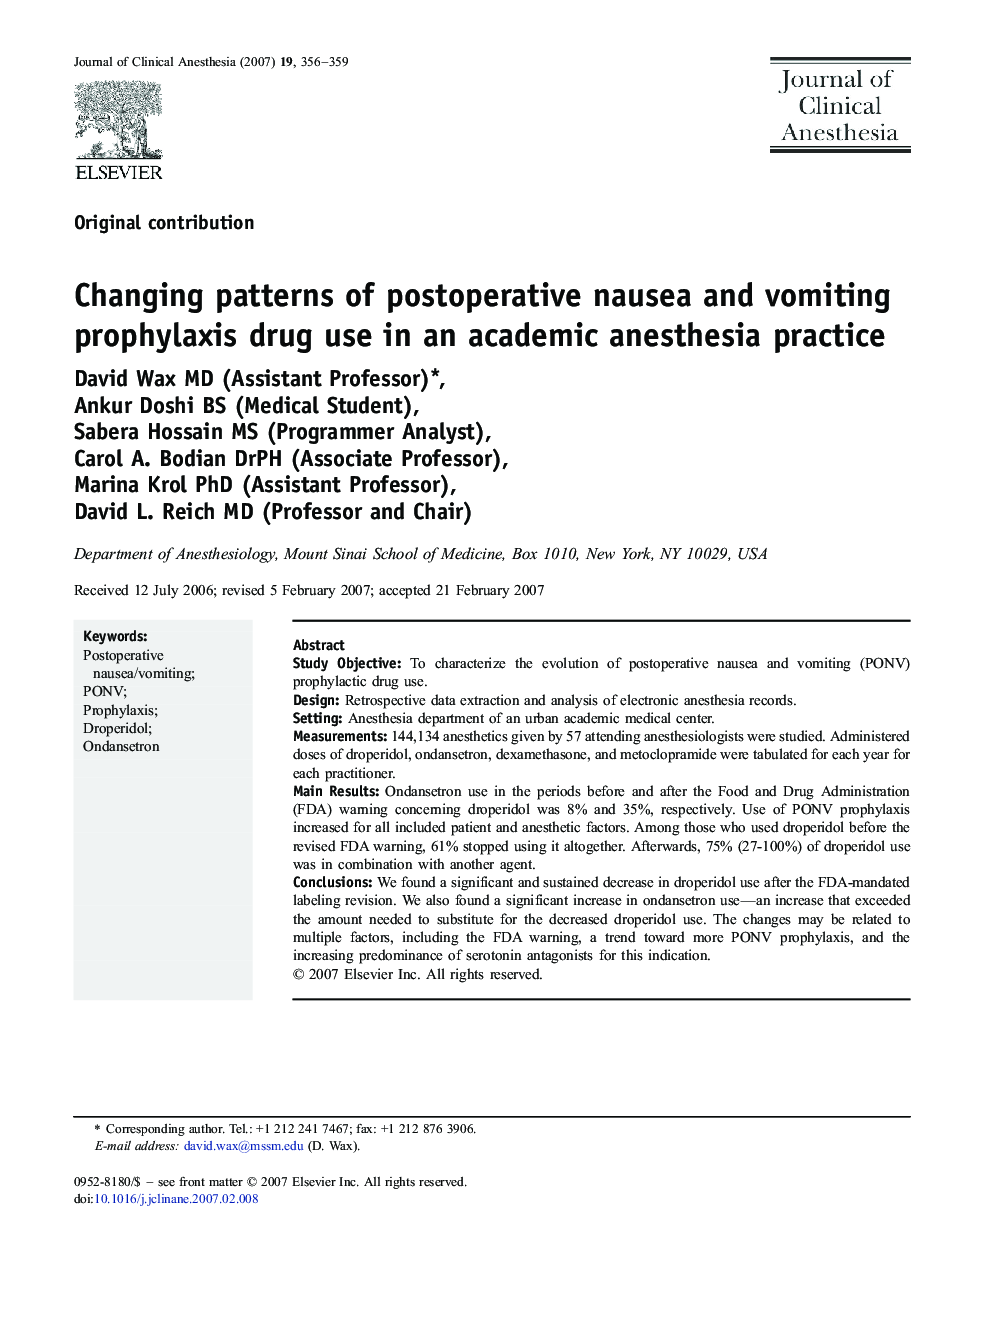 Changing patterns of postoperative nausea and vomiting prophylaxis drug use in an academic anesthesia practice